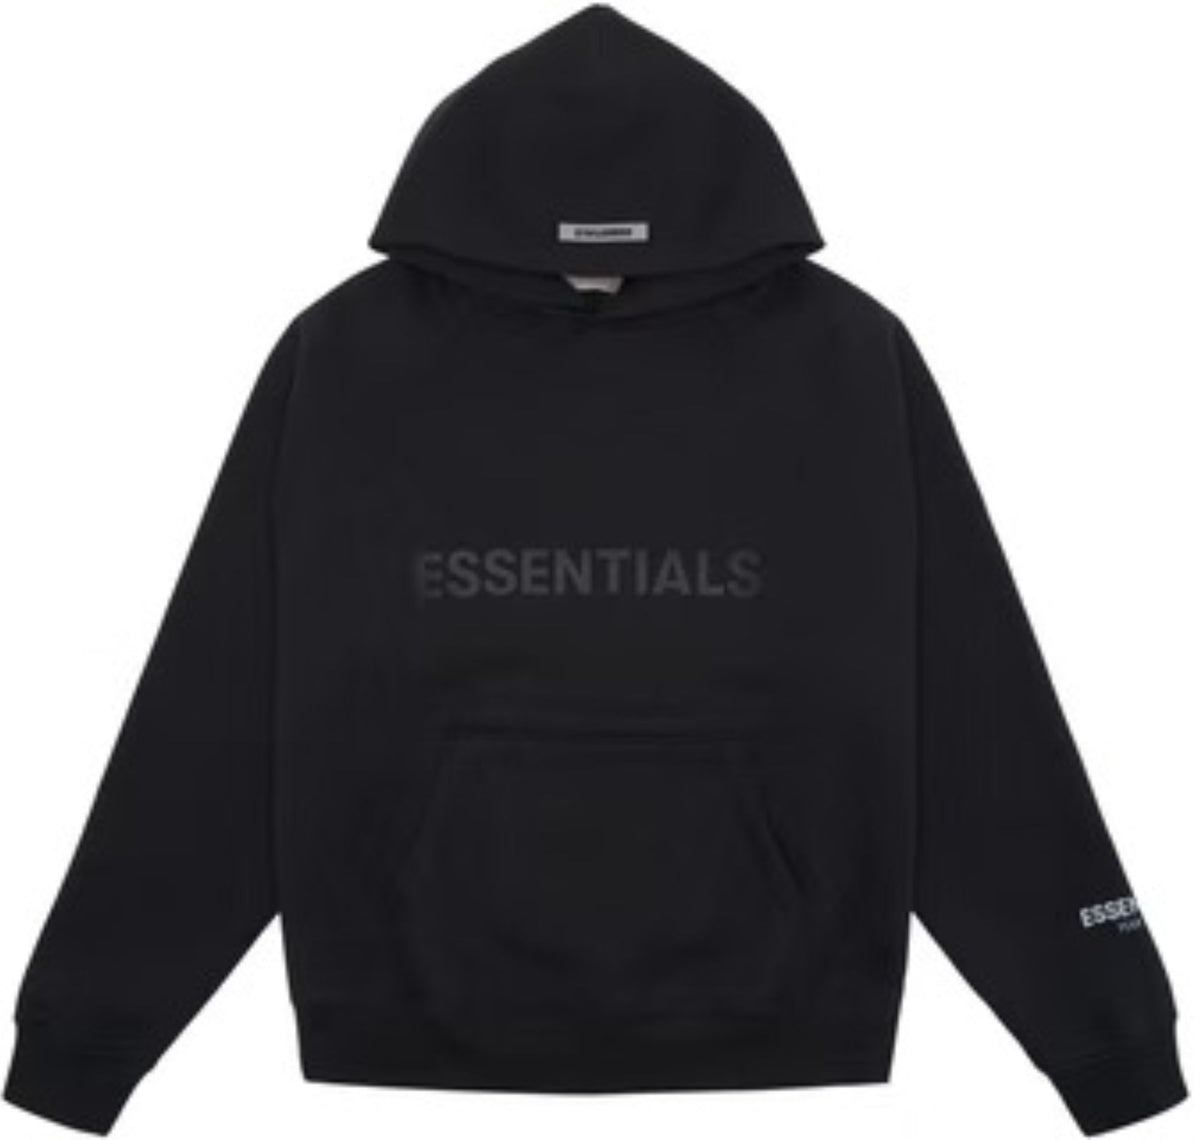 Essentials Fear Of God Limo Black Hoodie